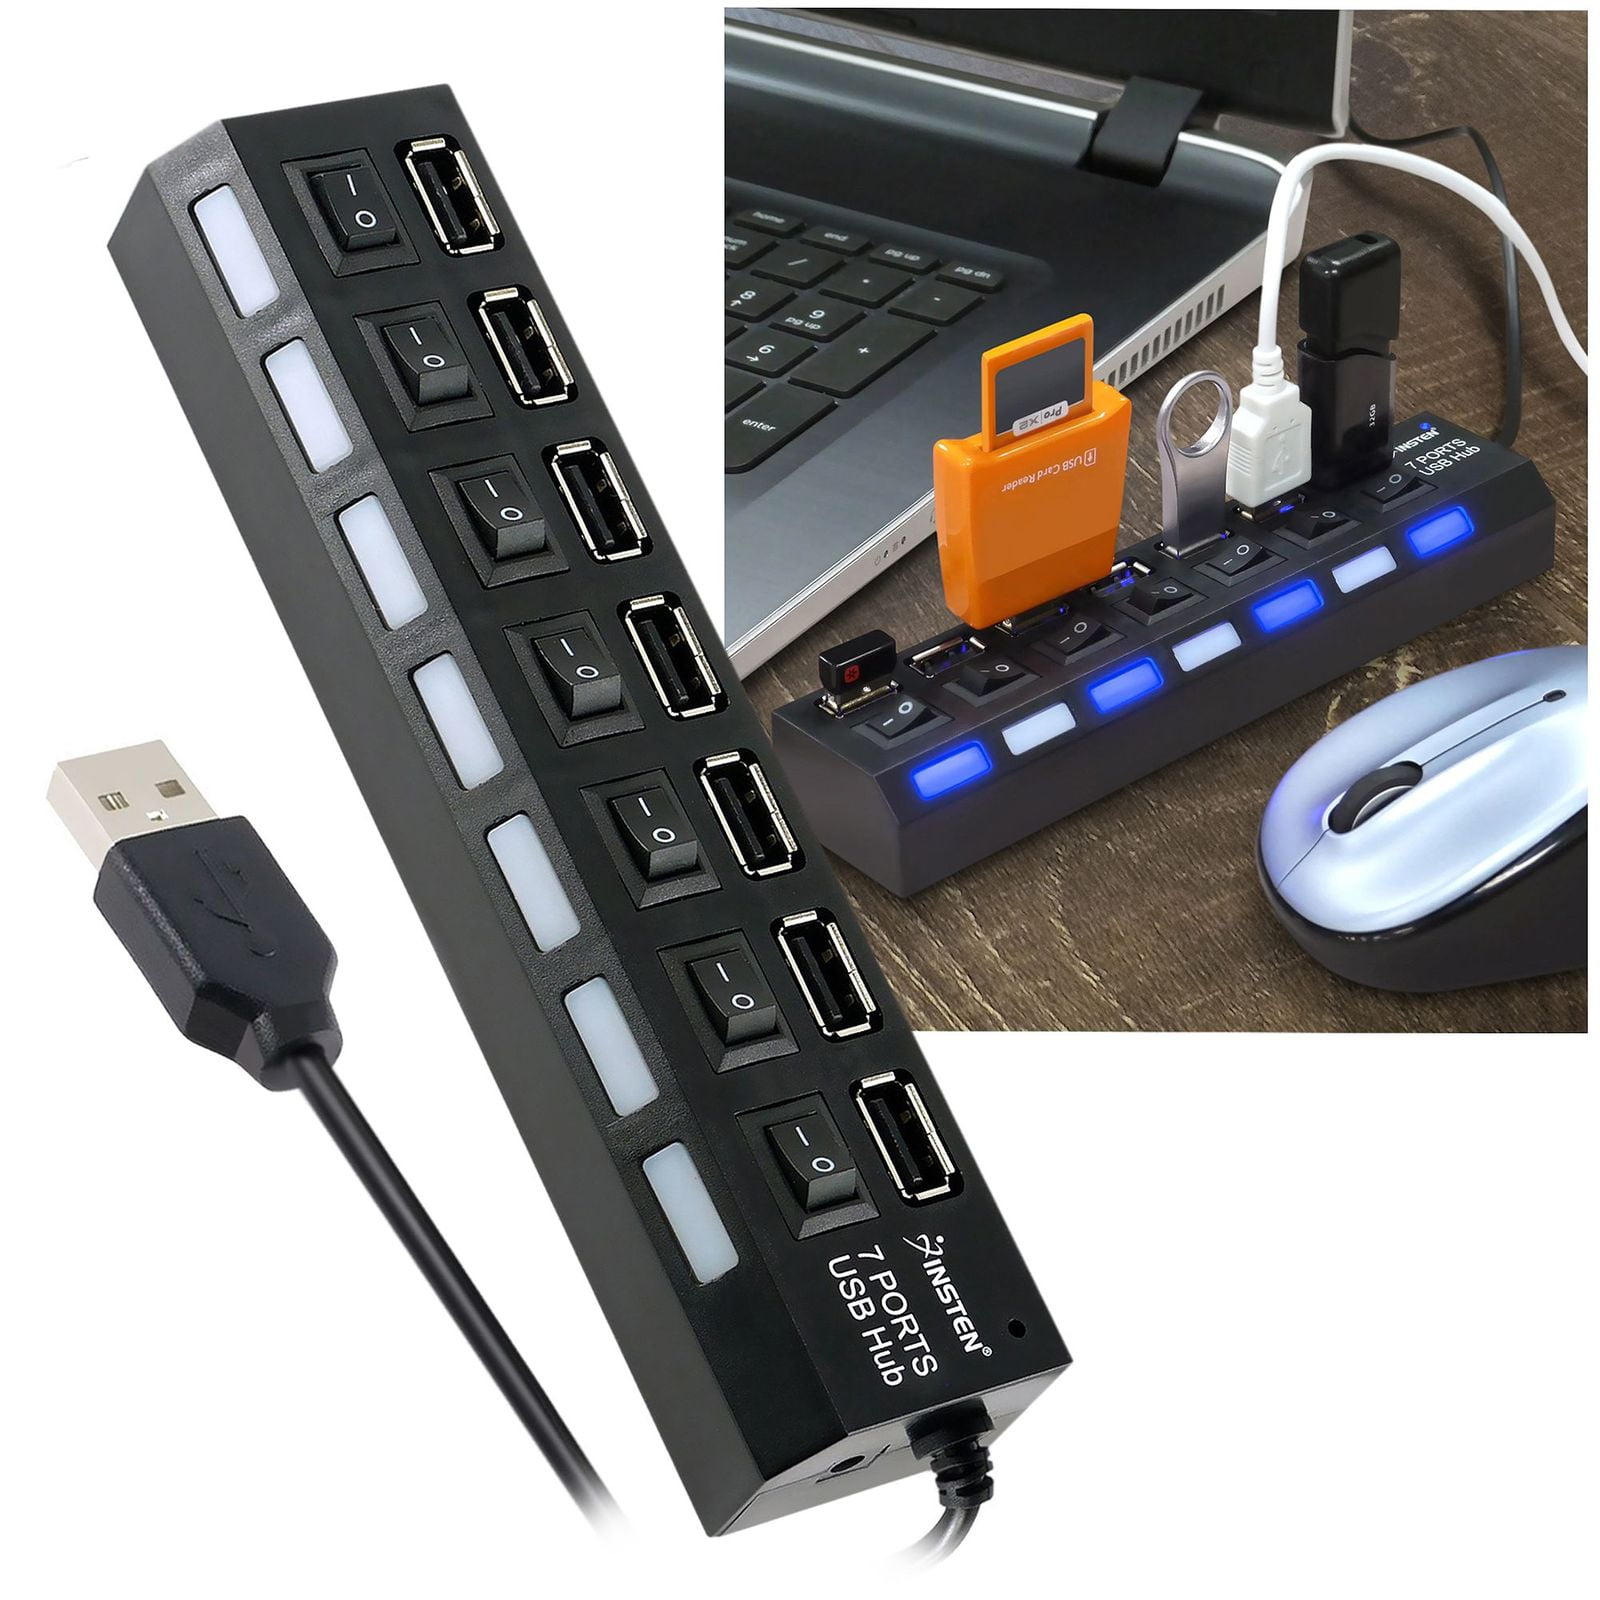 7 Port USB Hub for Laptop Computer Adapter, Multiport 2.0 Splitter with On Off Switches for Windows PC Smartphone Charging Data Transfer - Walmart.com